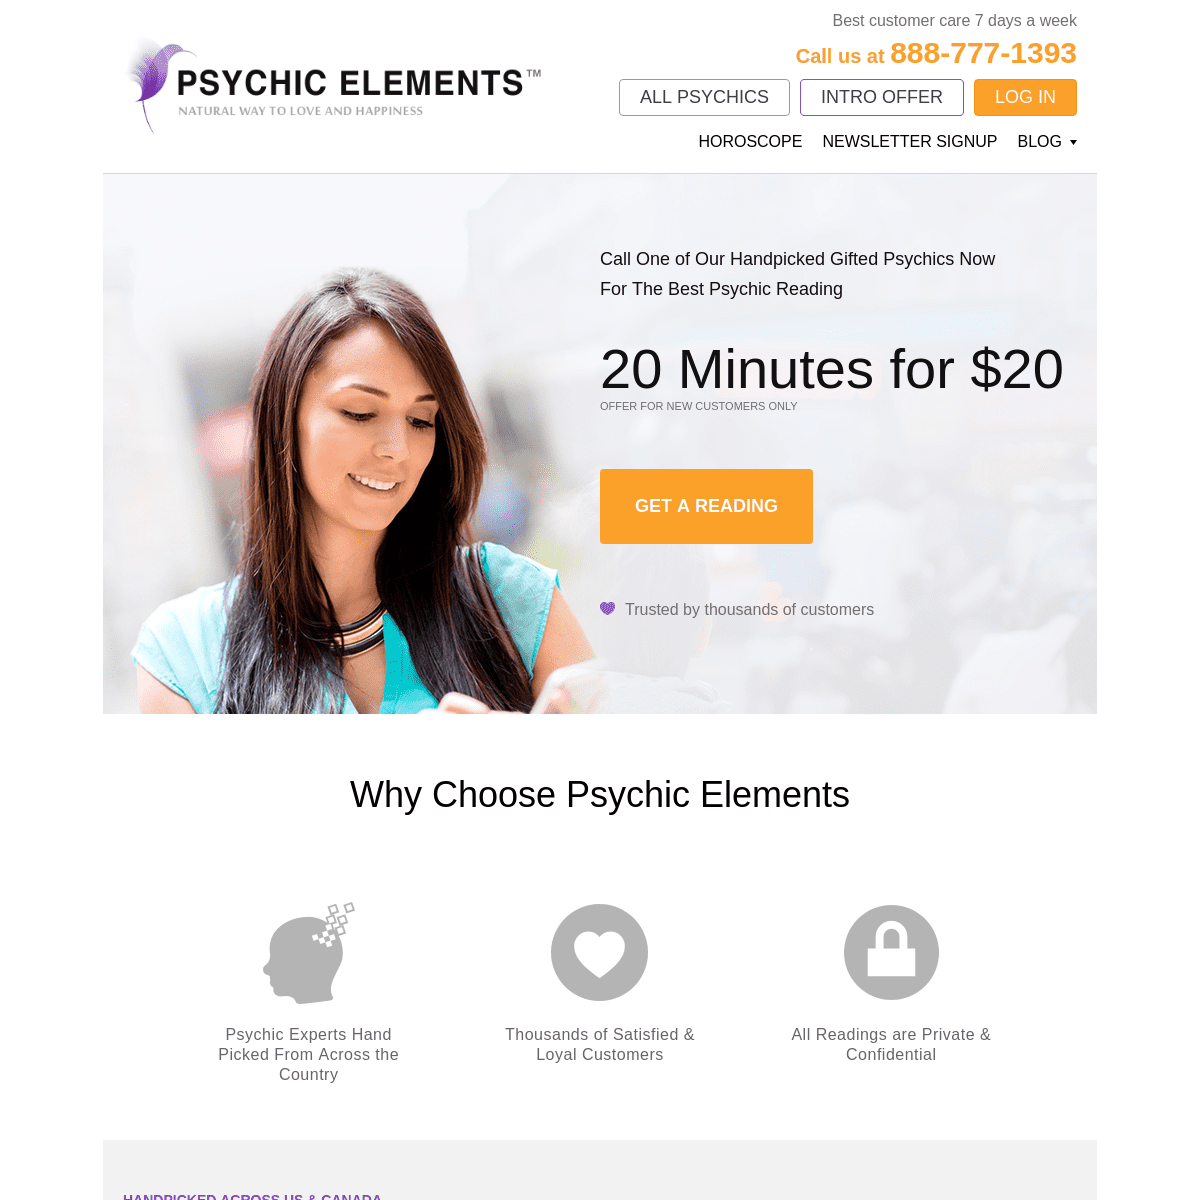 Simply the best online psychic readings available anywhere - Psychic Elements